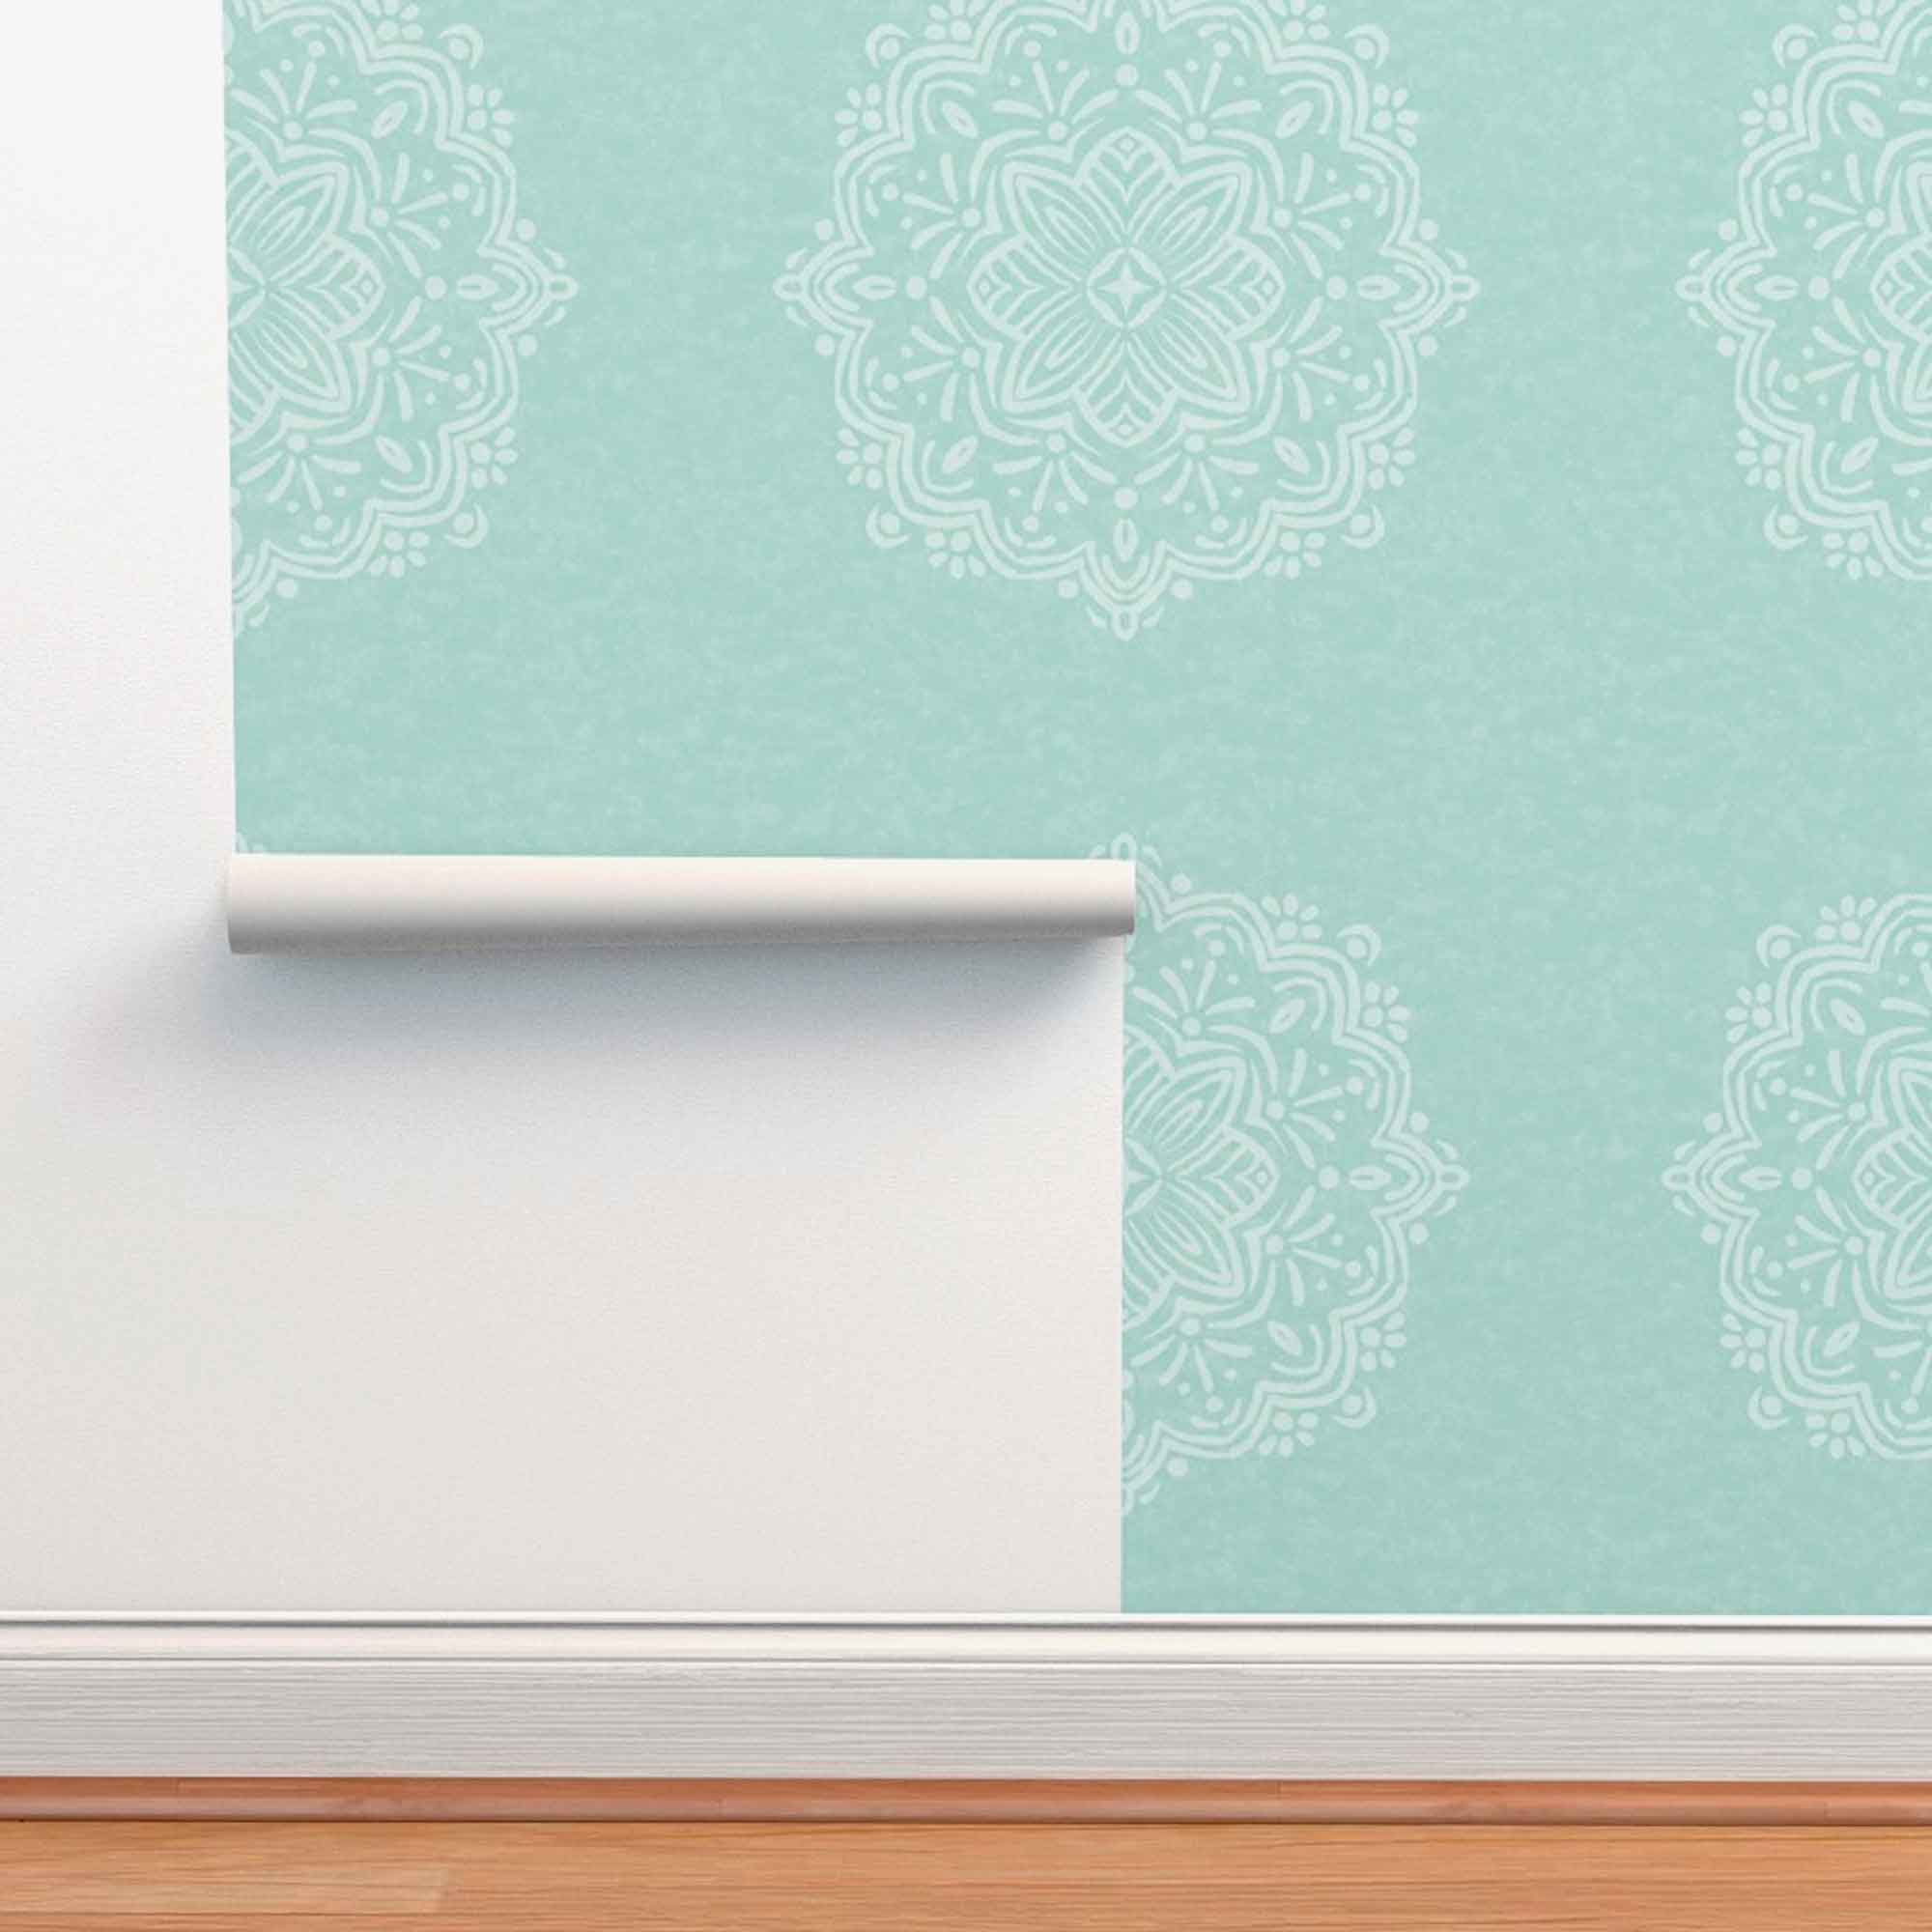 Simple Hand-Drawn Boho Mandalas on Aqua Background Removable Peel & Stick and Pre-Pasted Wallpaper - XL Size - Roll Size